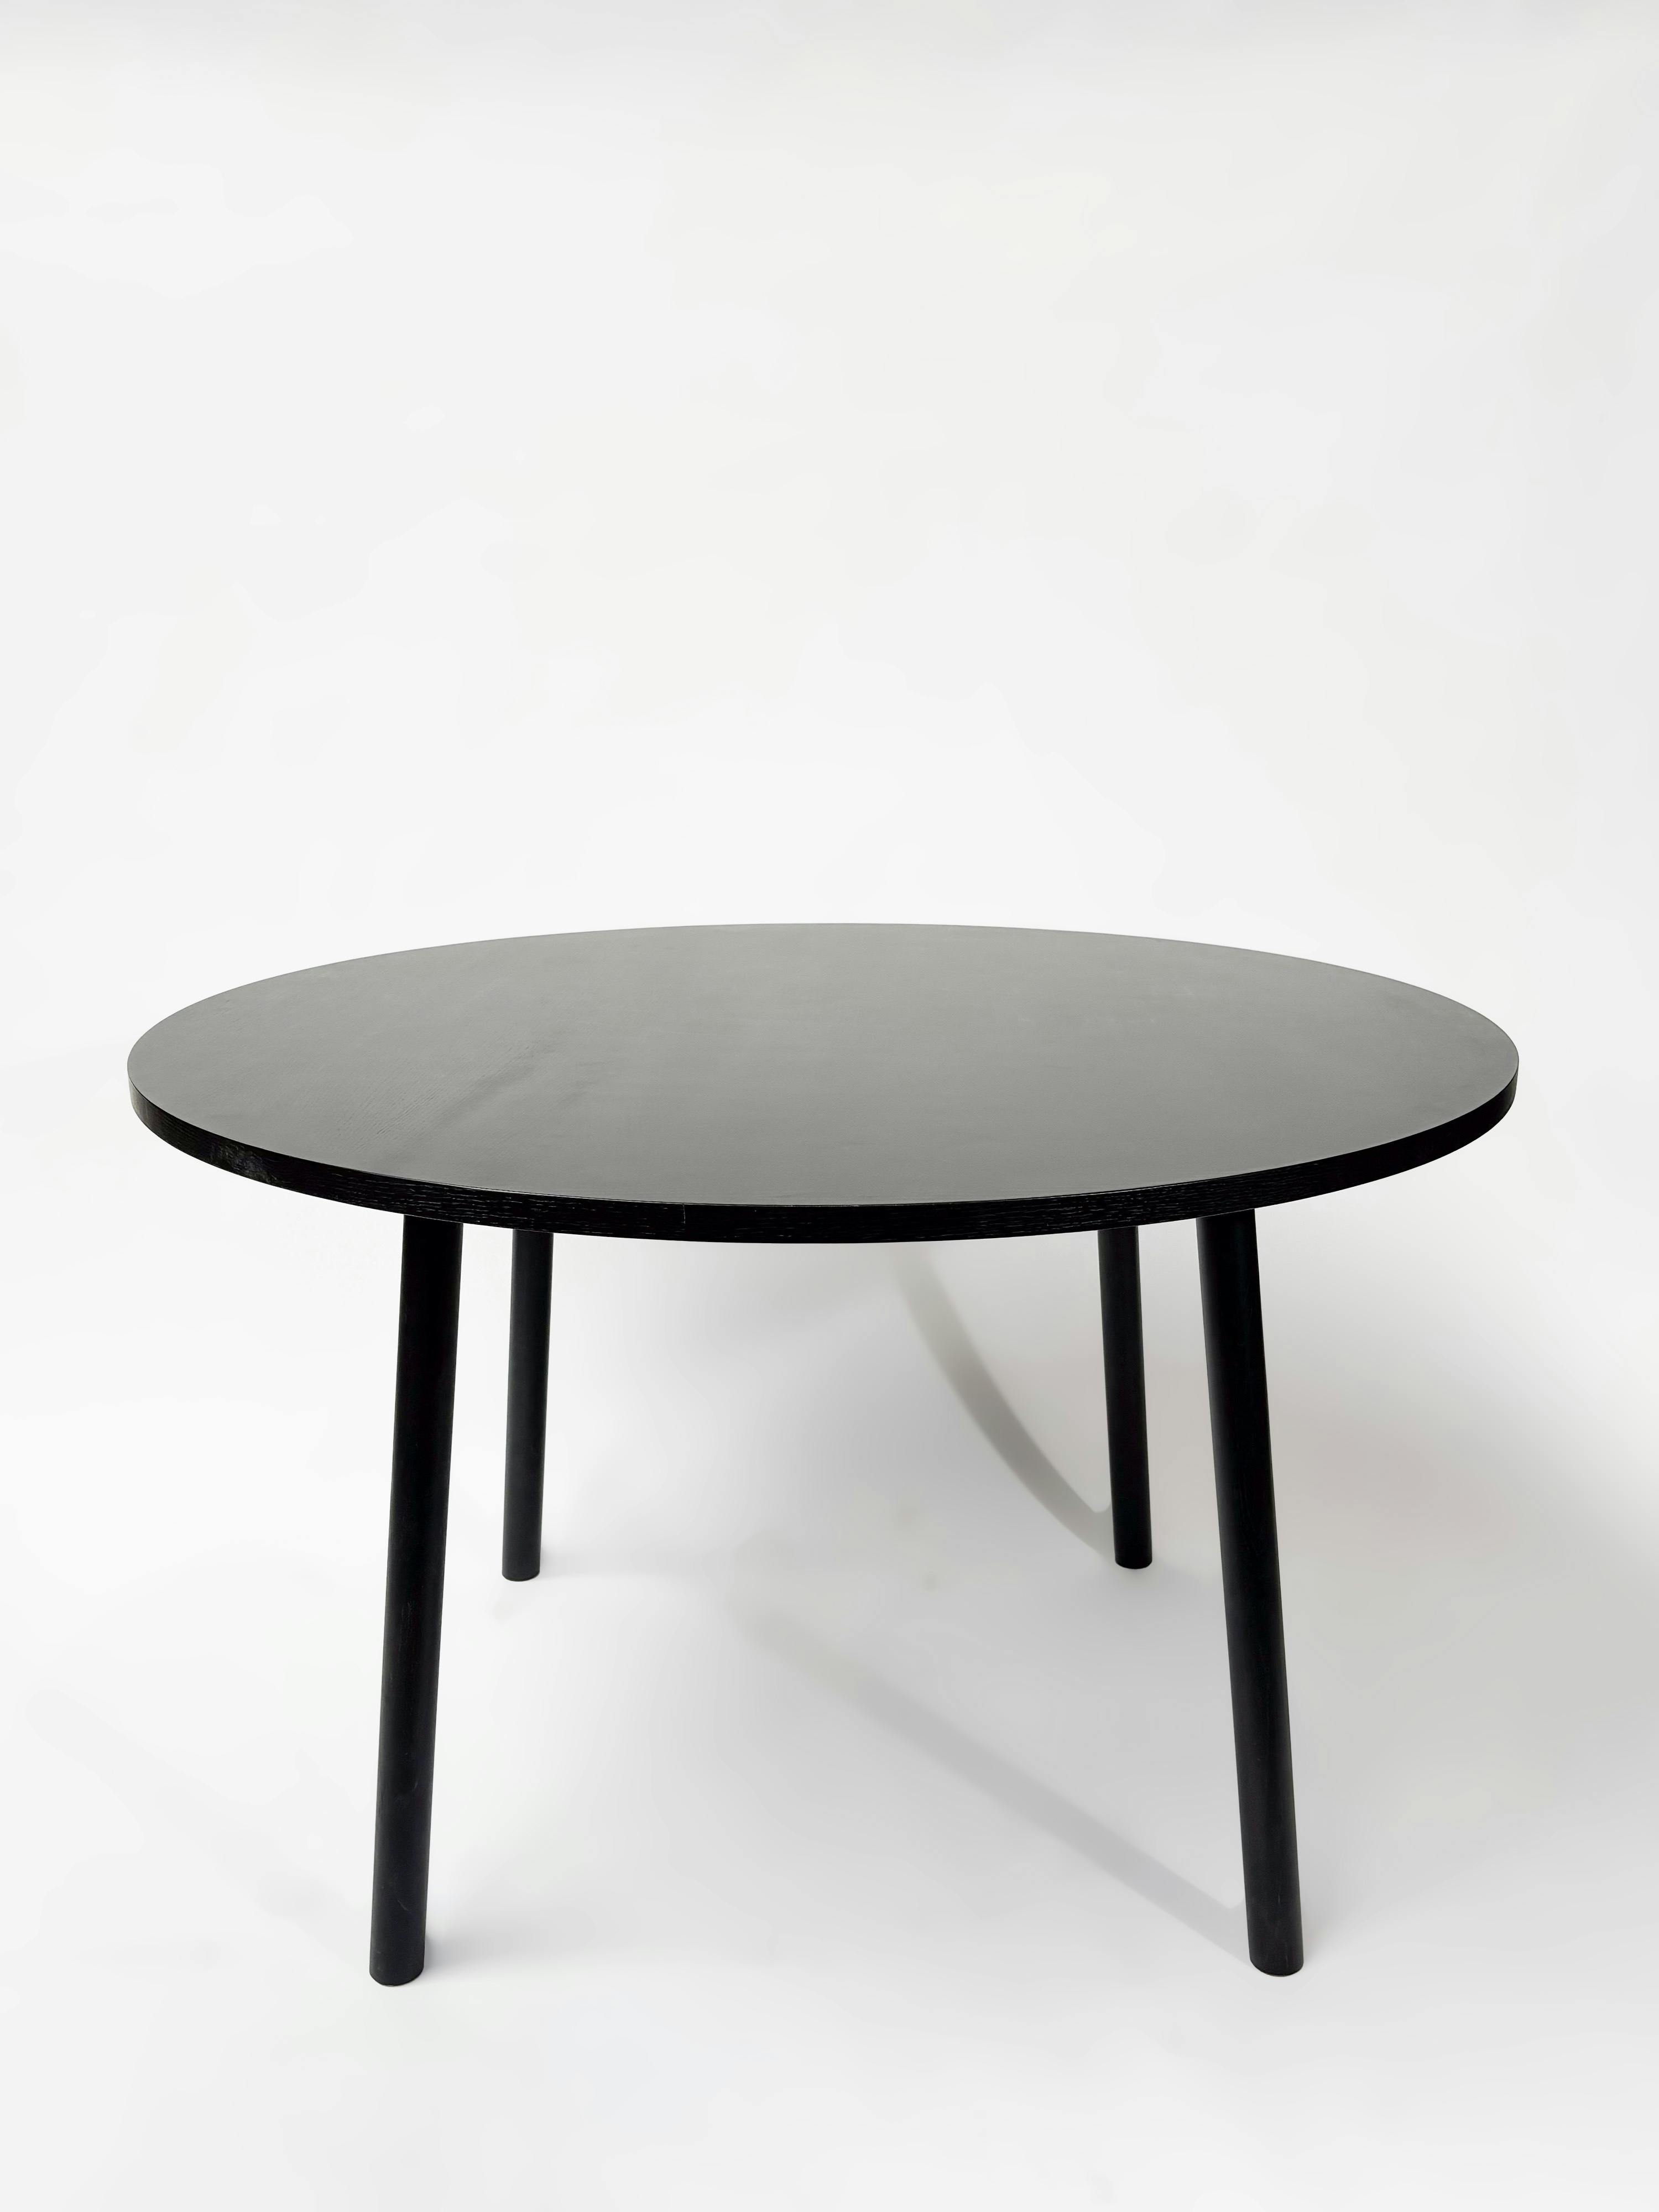 CRUSO Black Wooden Table - 120cm - Relieve Furniture